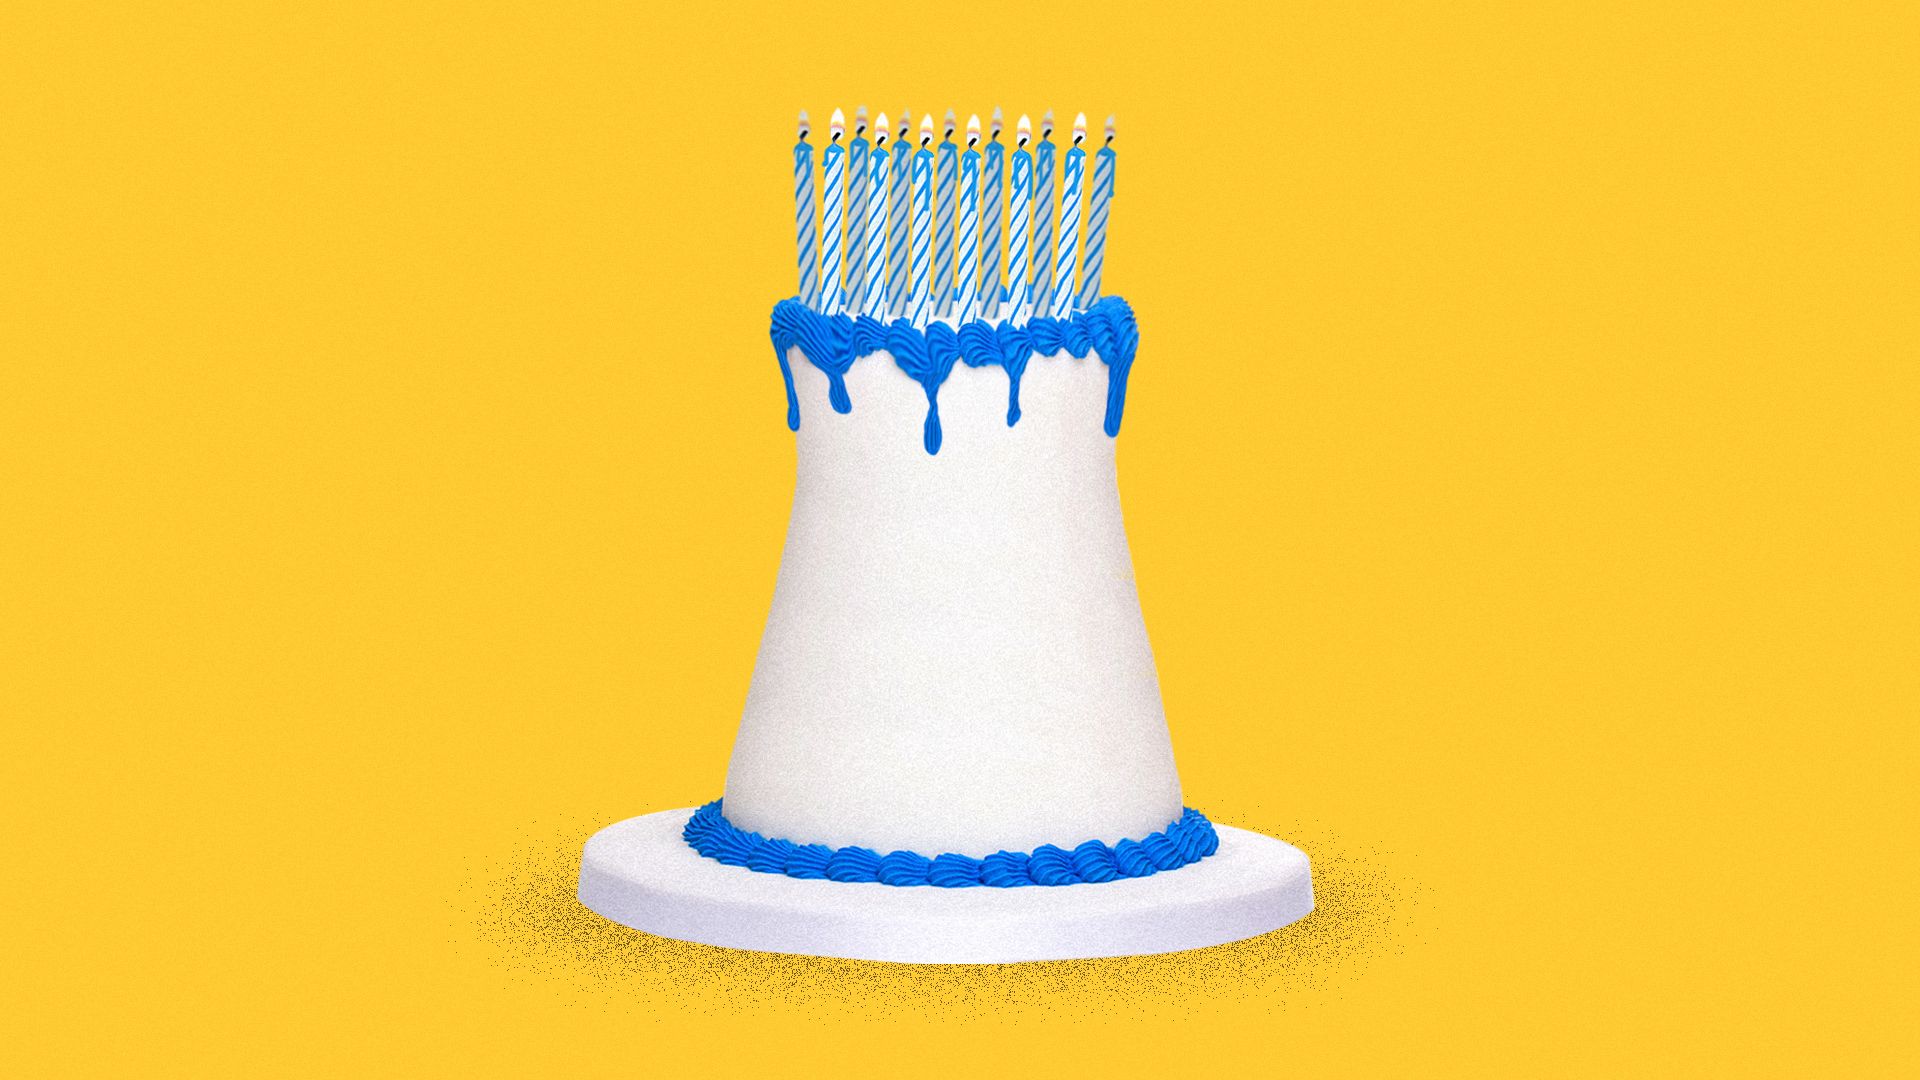 Illustration of a melting birthday cake in the shape of a nuclear tower with too many candles on top